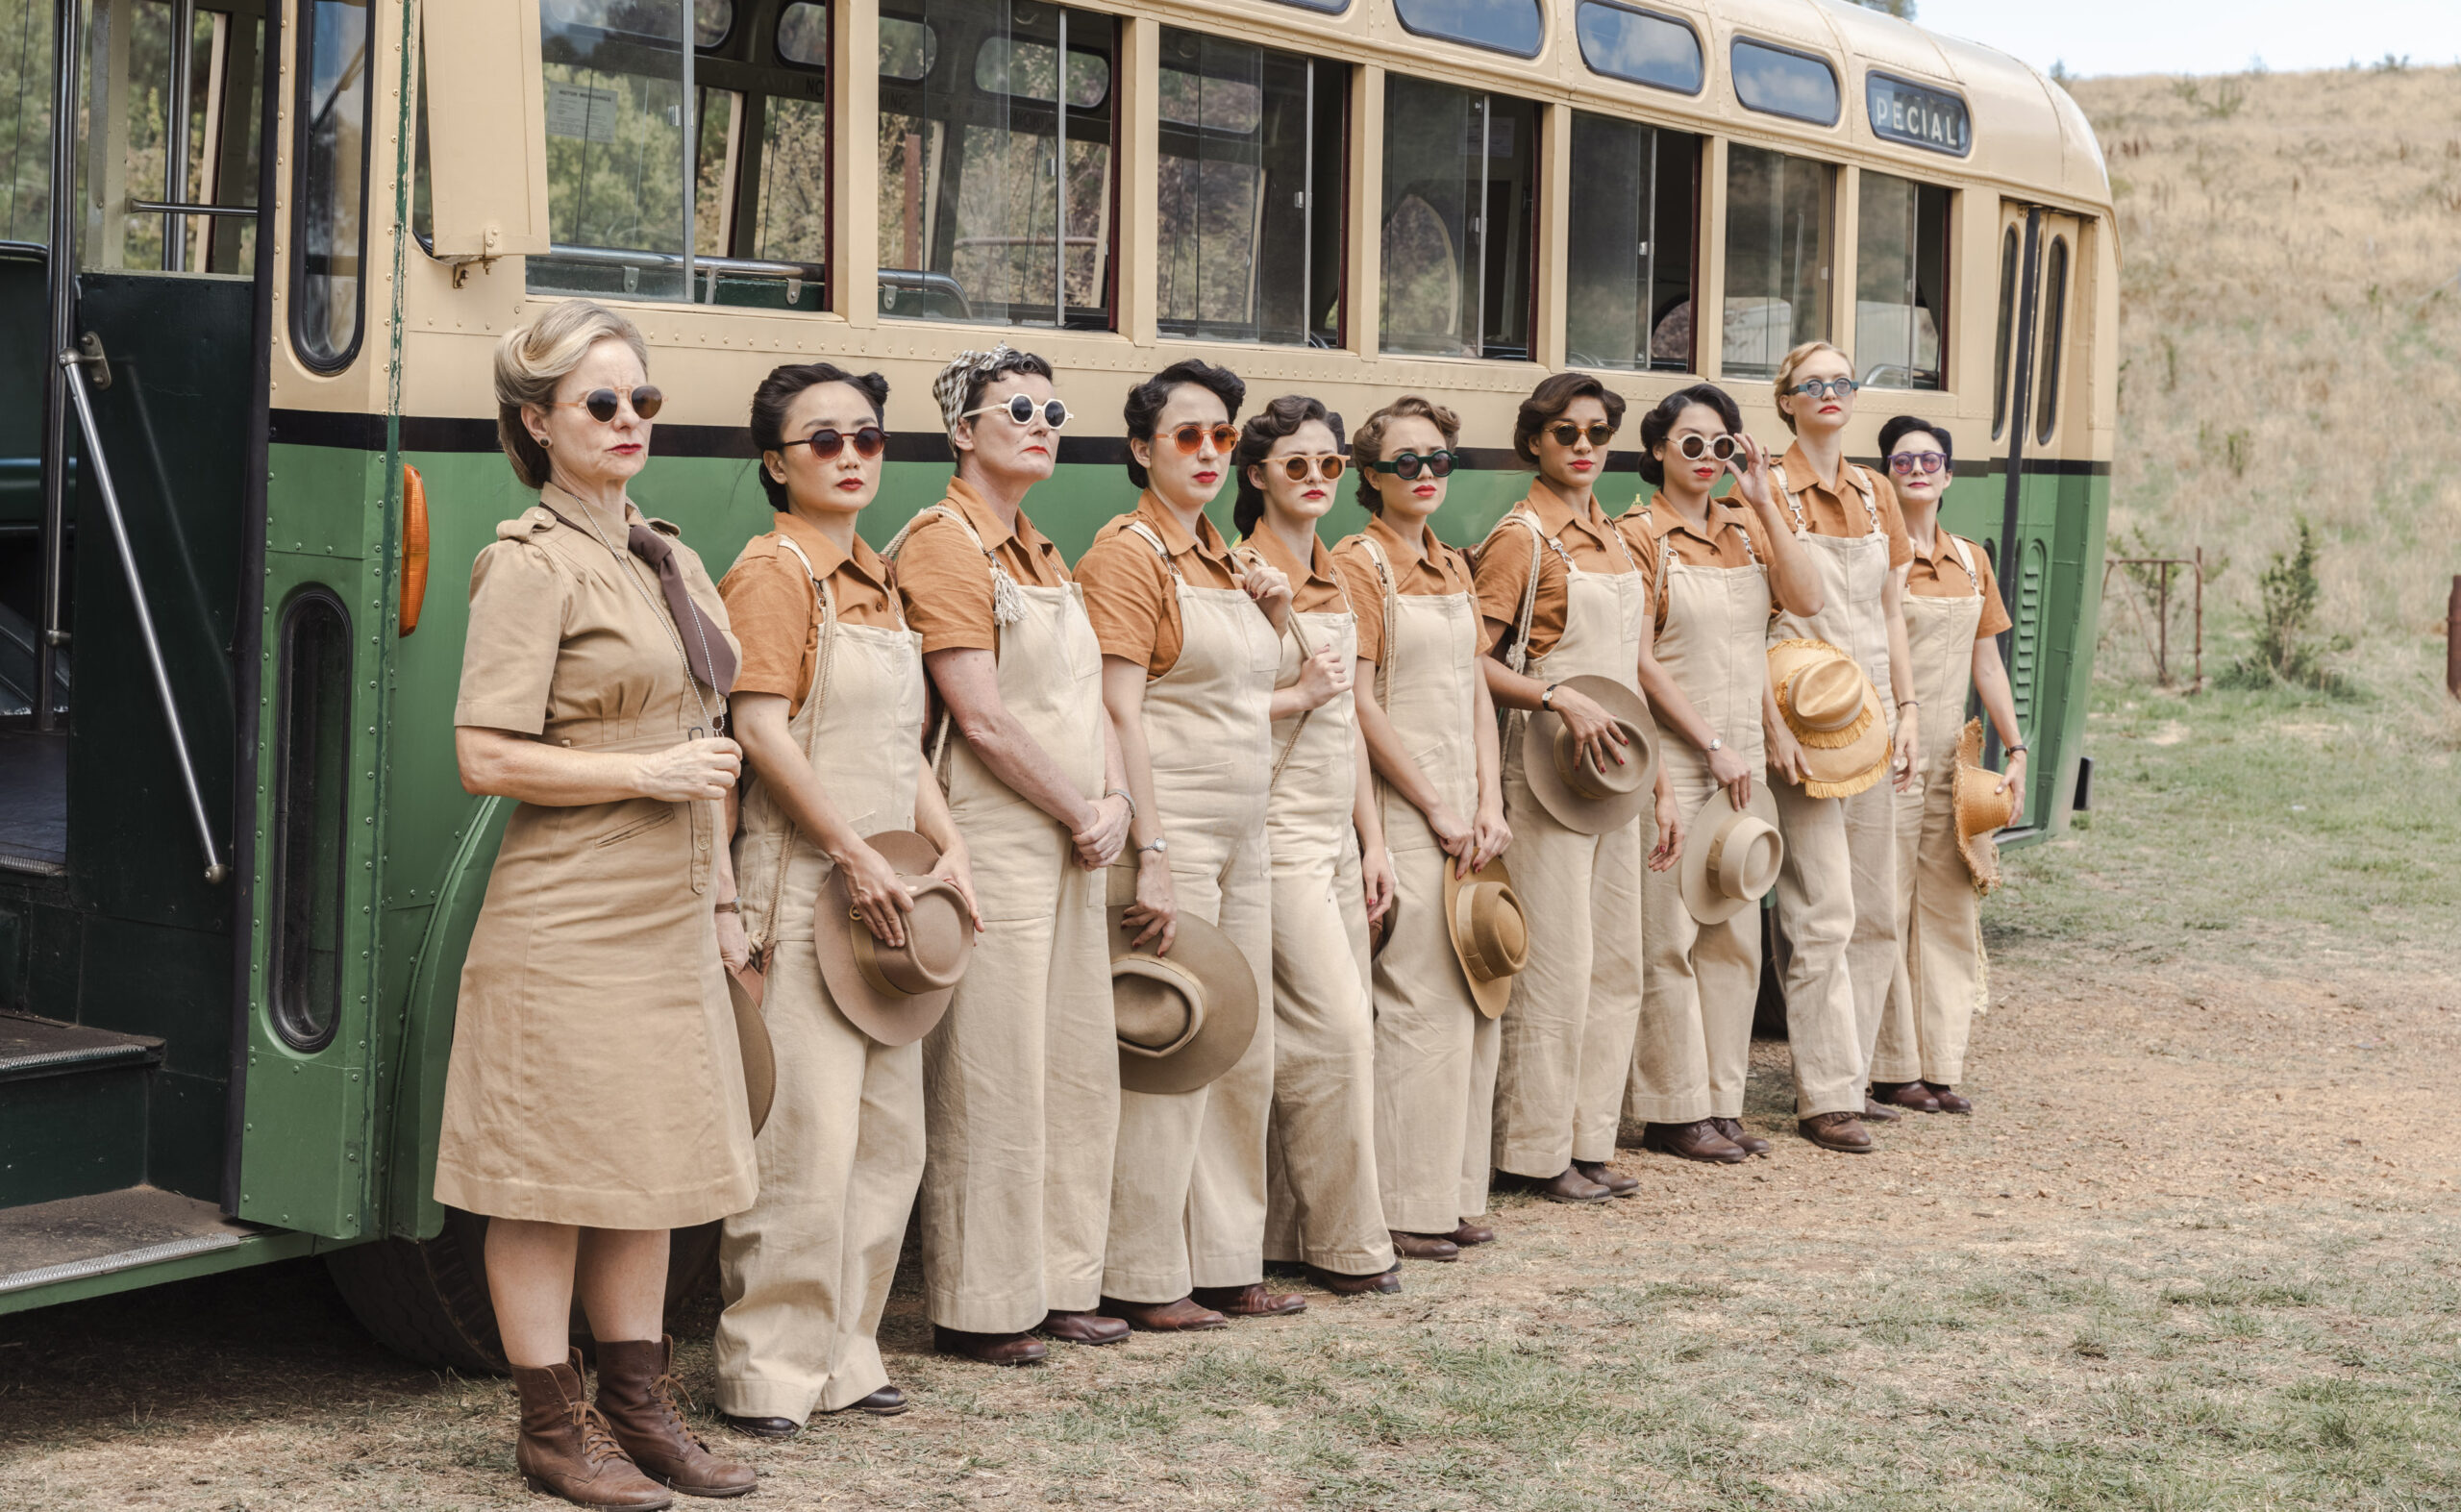 WATCH: First look at SBS’ hilarious new revisionist series of 1940s Australia